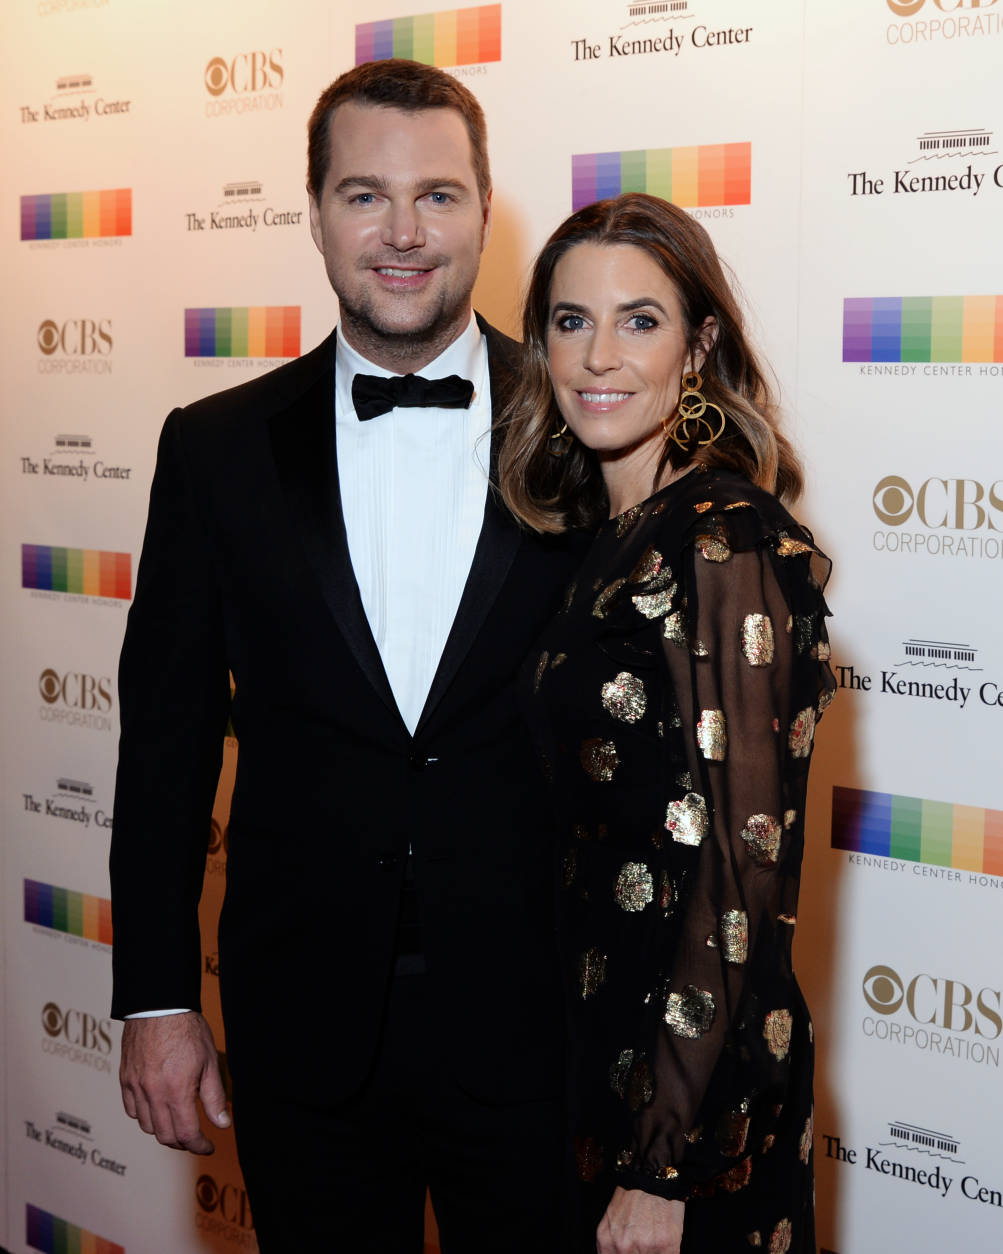 Actor Chris O’Donnell and his wife Caroline Fentress. (Courtesy Shannon Finney, <a href="http://www.shannonfinneyphotography.com">www.shannonfinneyphotography.com</a>)